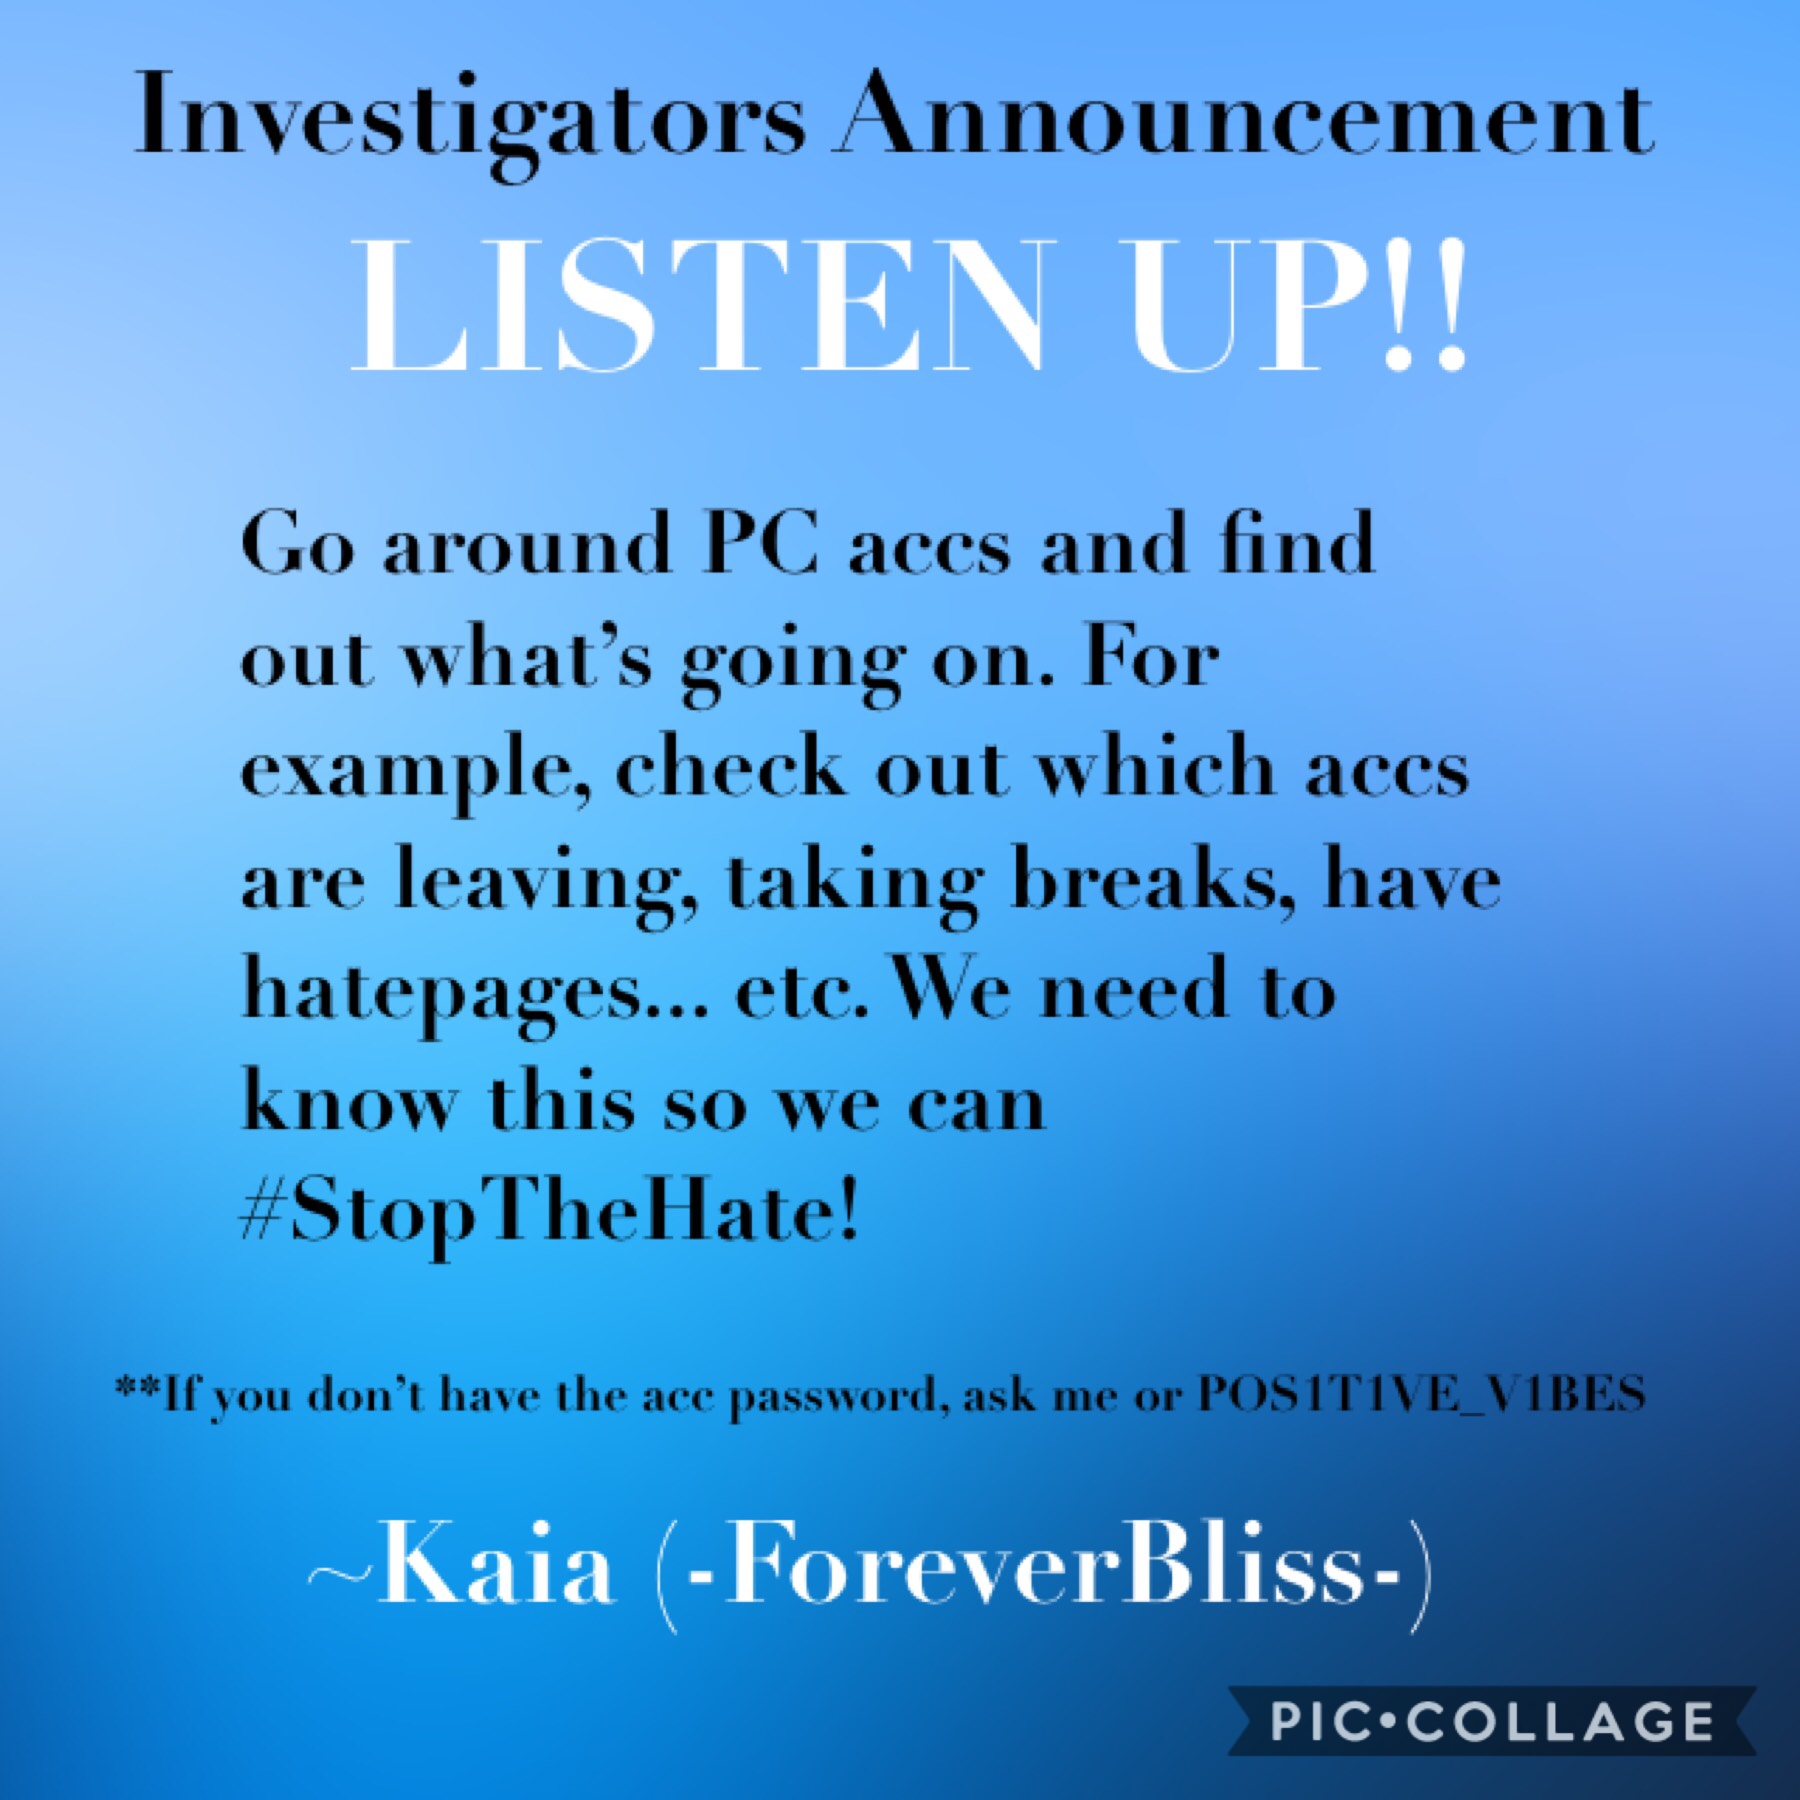 •••tap•••
Go find out PC info!!
Love,
Kaia
😘